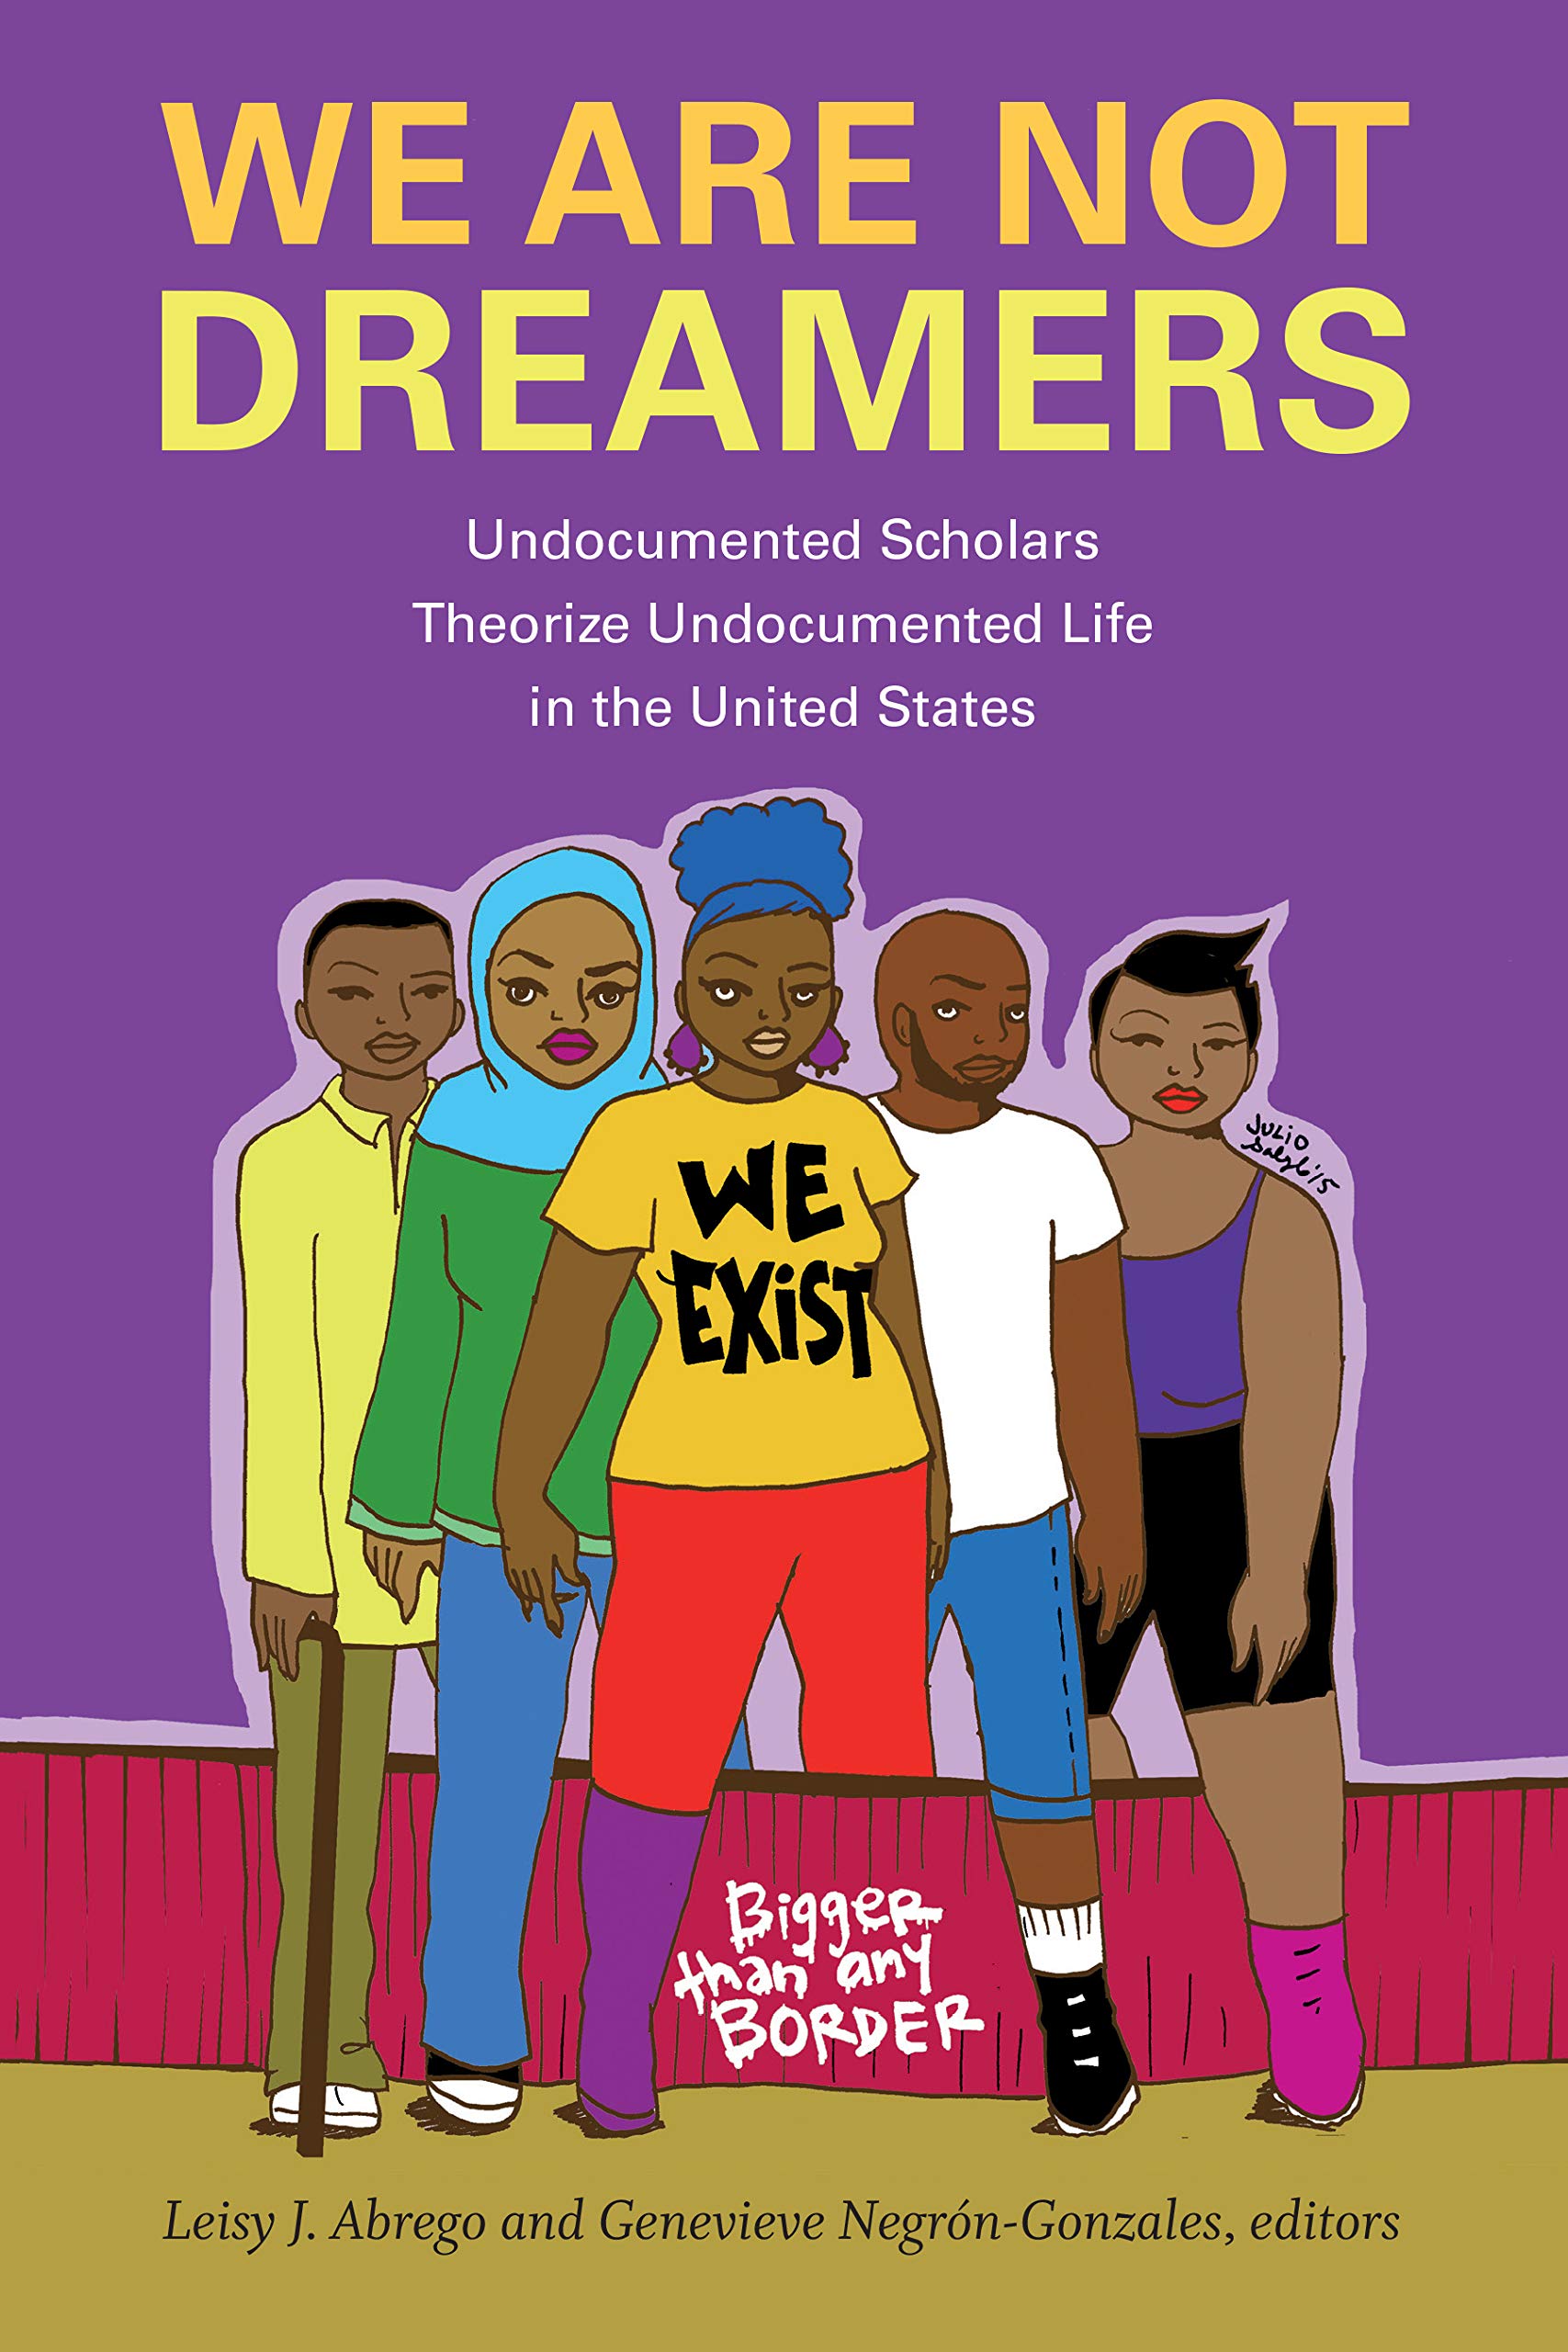 We Are Not Dreamers | Leisy J. Abrego, Genevieve Negrón-Gonzales